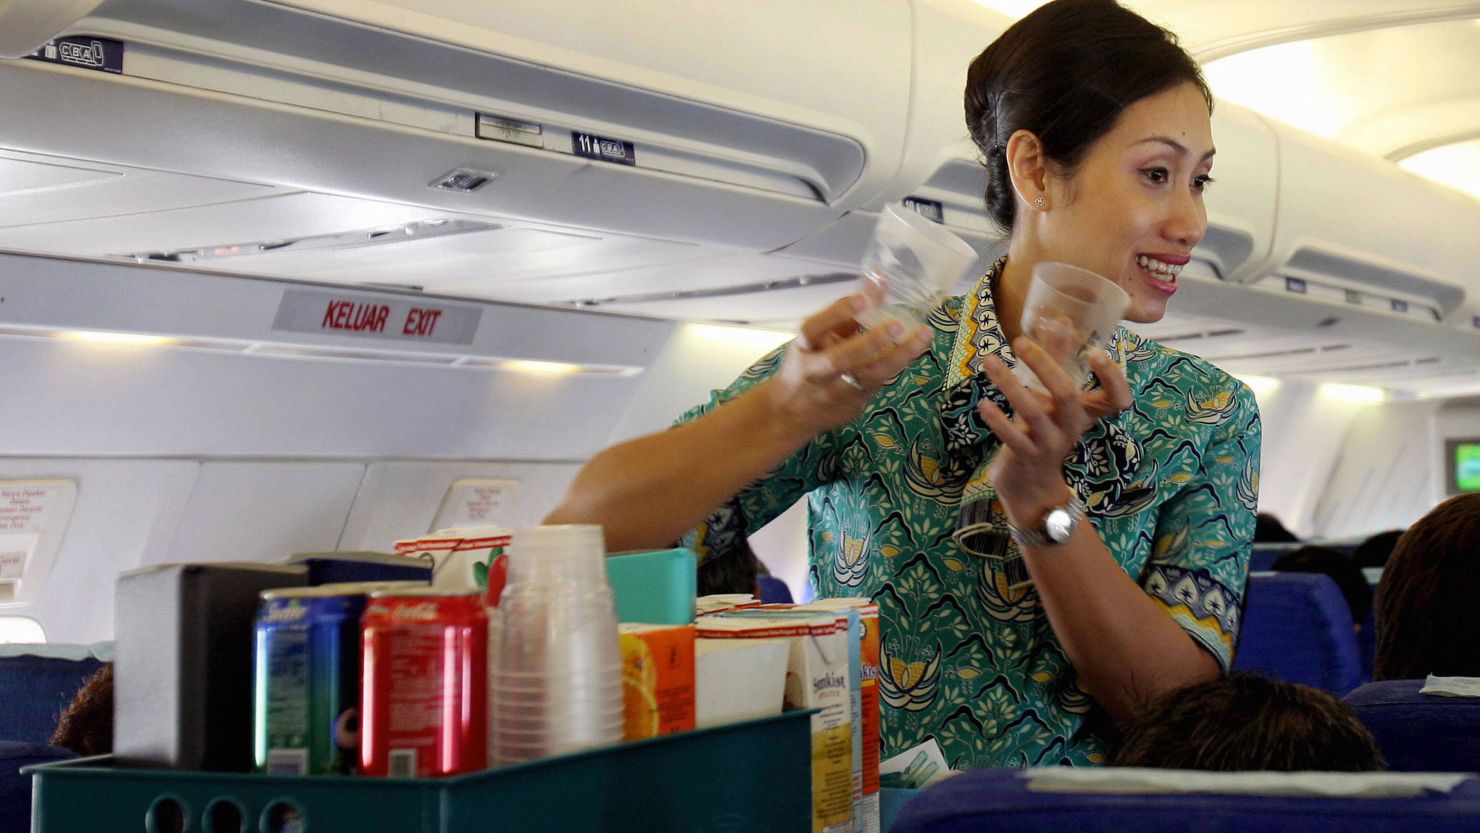 Umami-rich foods fare best in flight. Another tomato juice, sir?